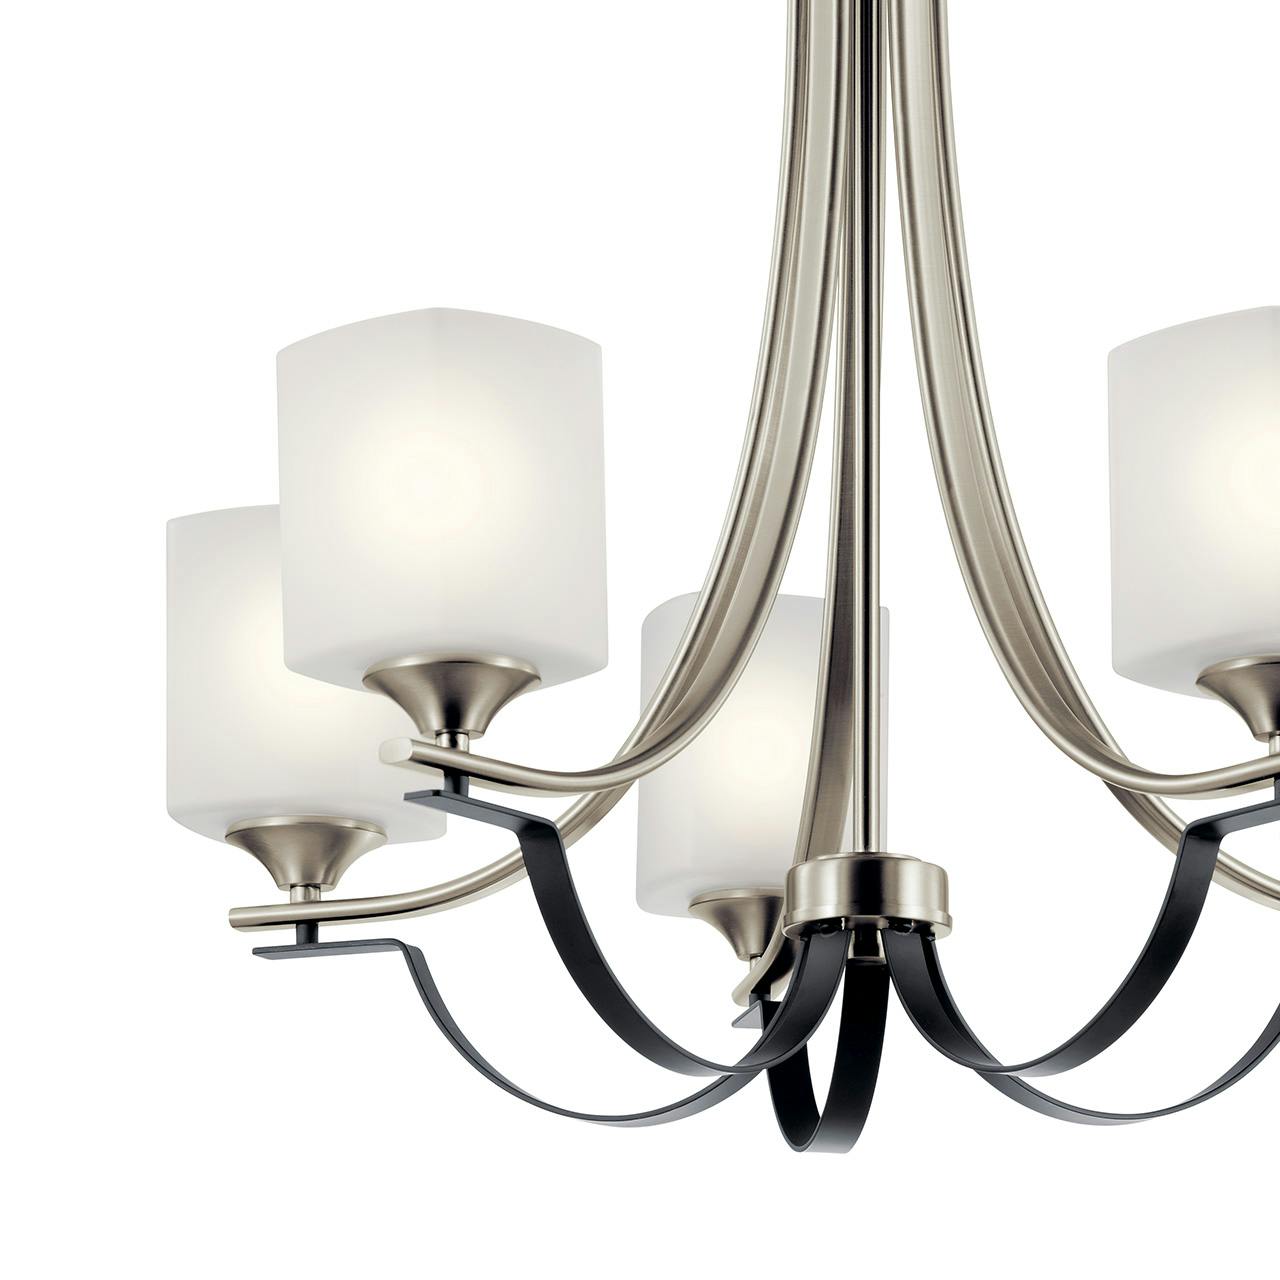 Close up view of the Tula™ 5 Light Chandelier Brushed Nickel on a white background